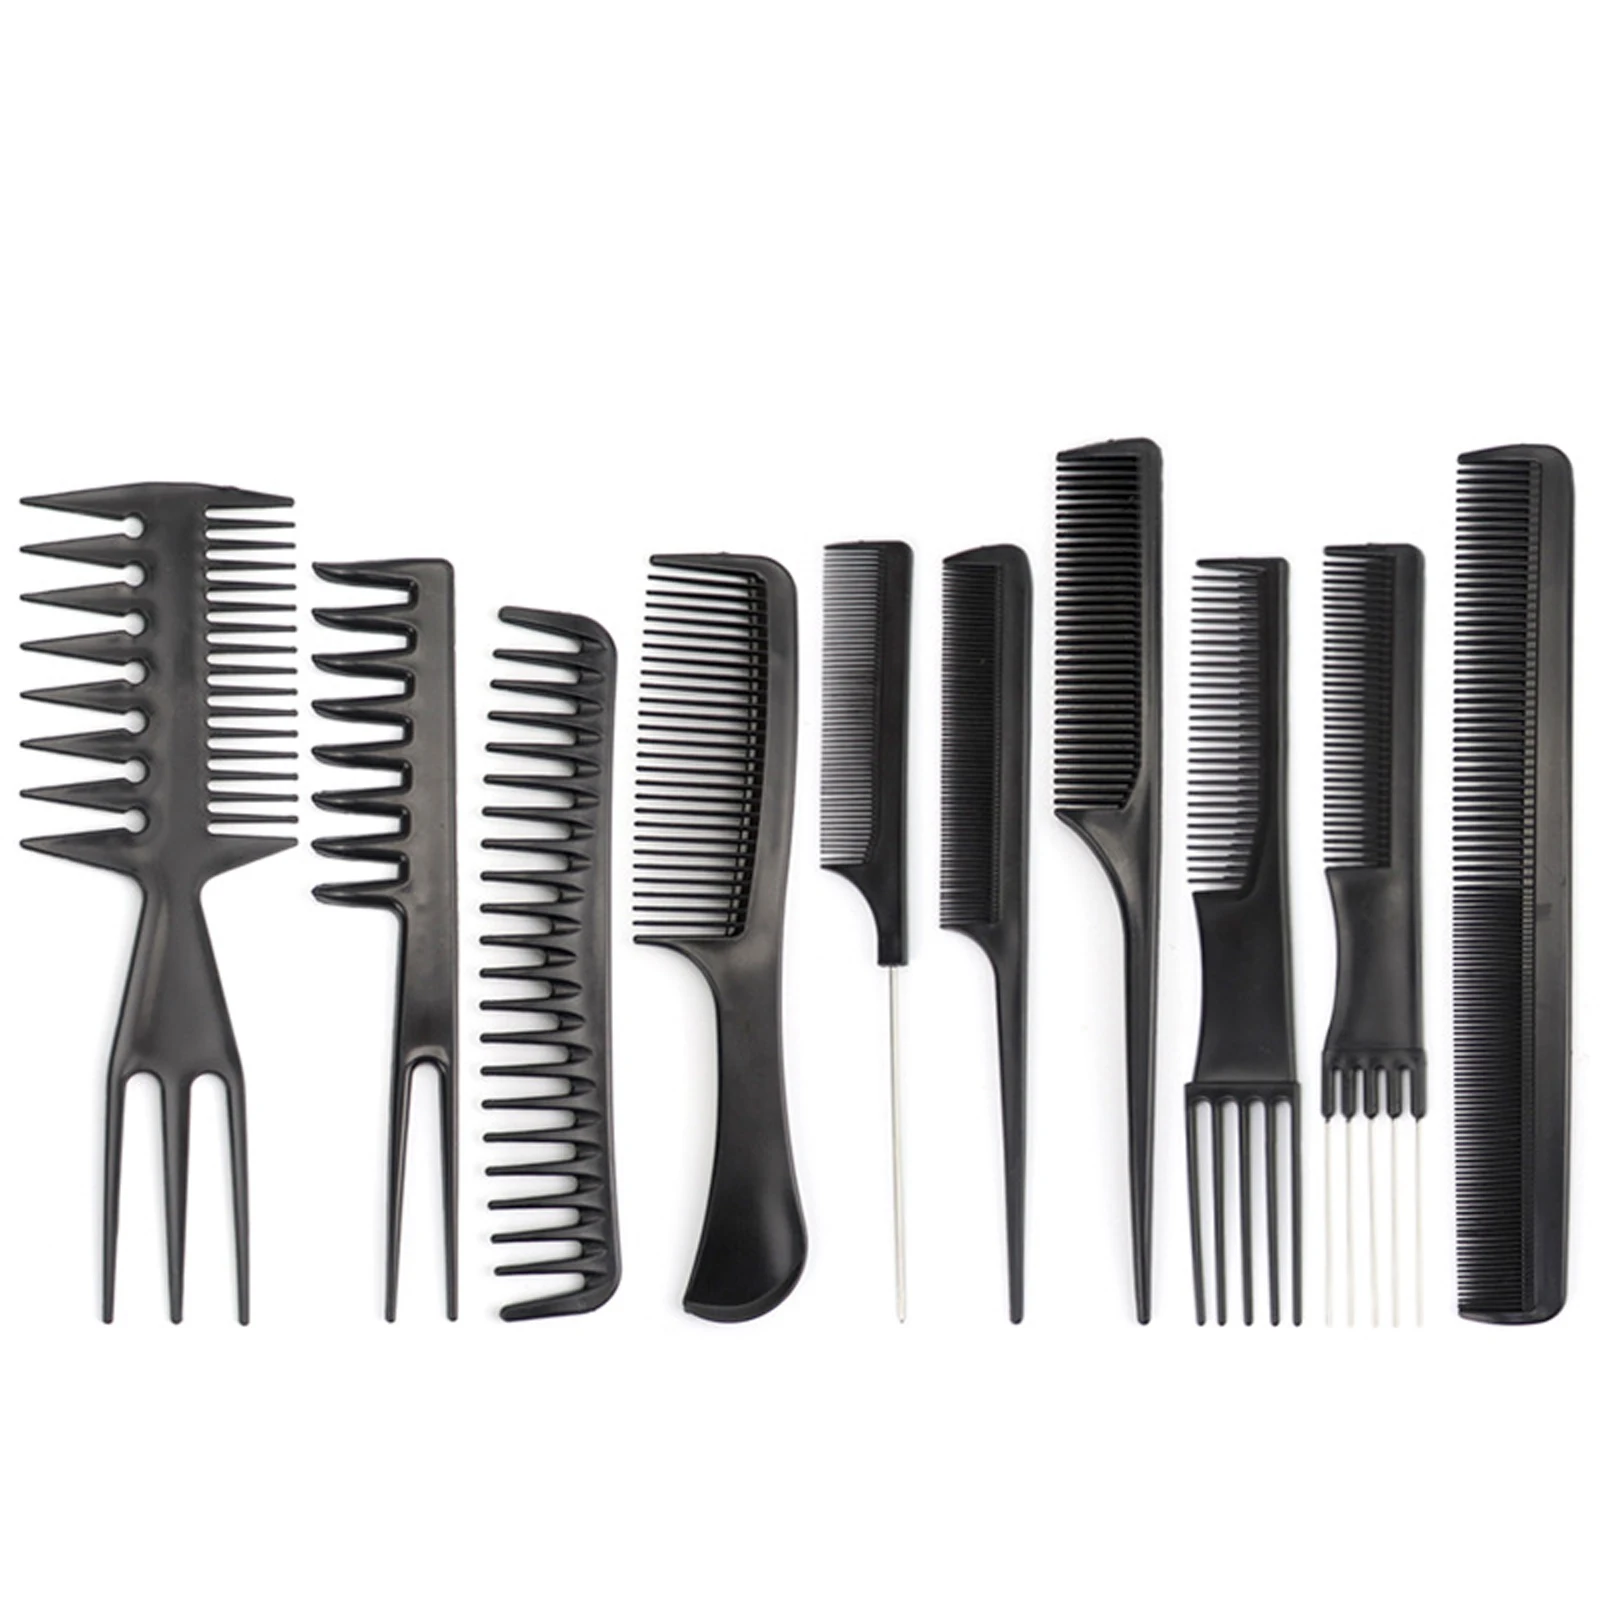 10pcs/lot Black Hair Comb Set Styling Hairdressing Comb In 10 Designs Barber Cover Training Tail Comb Hair Comb Styling Comb